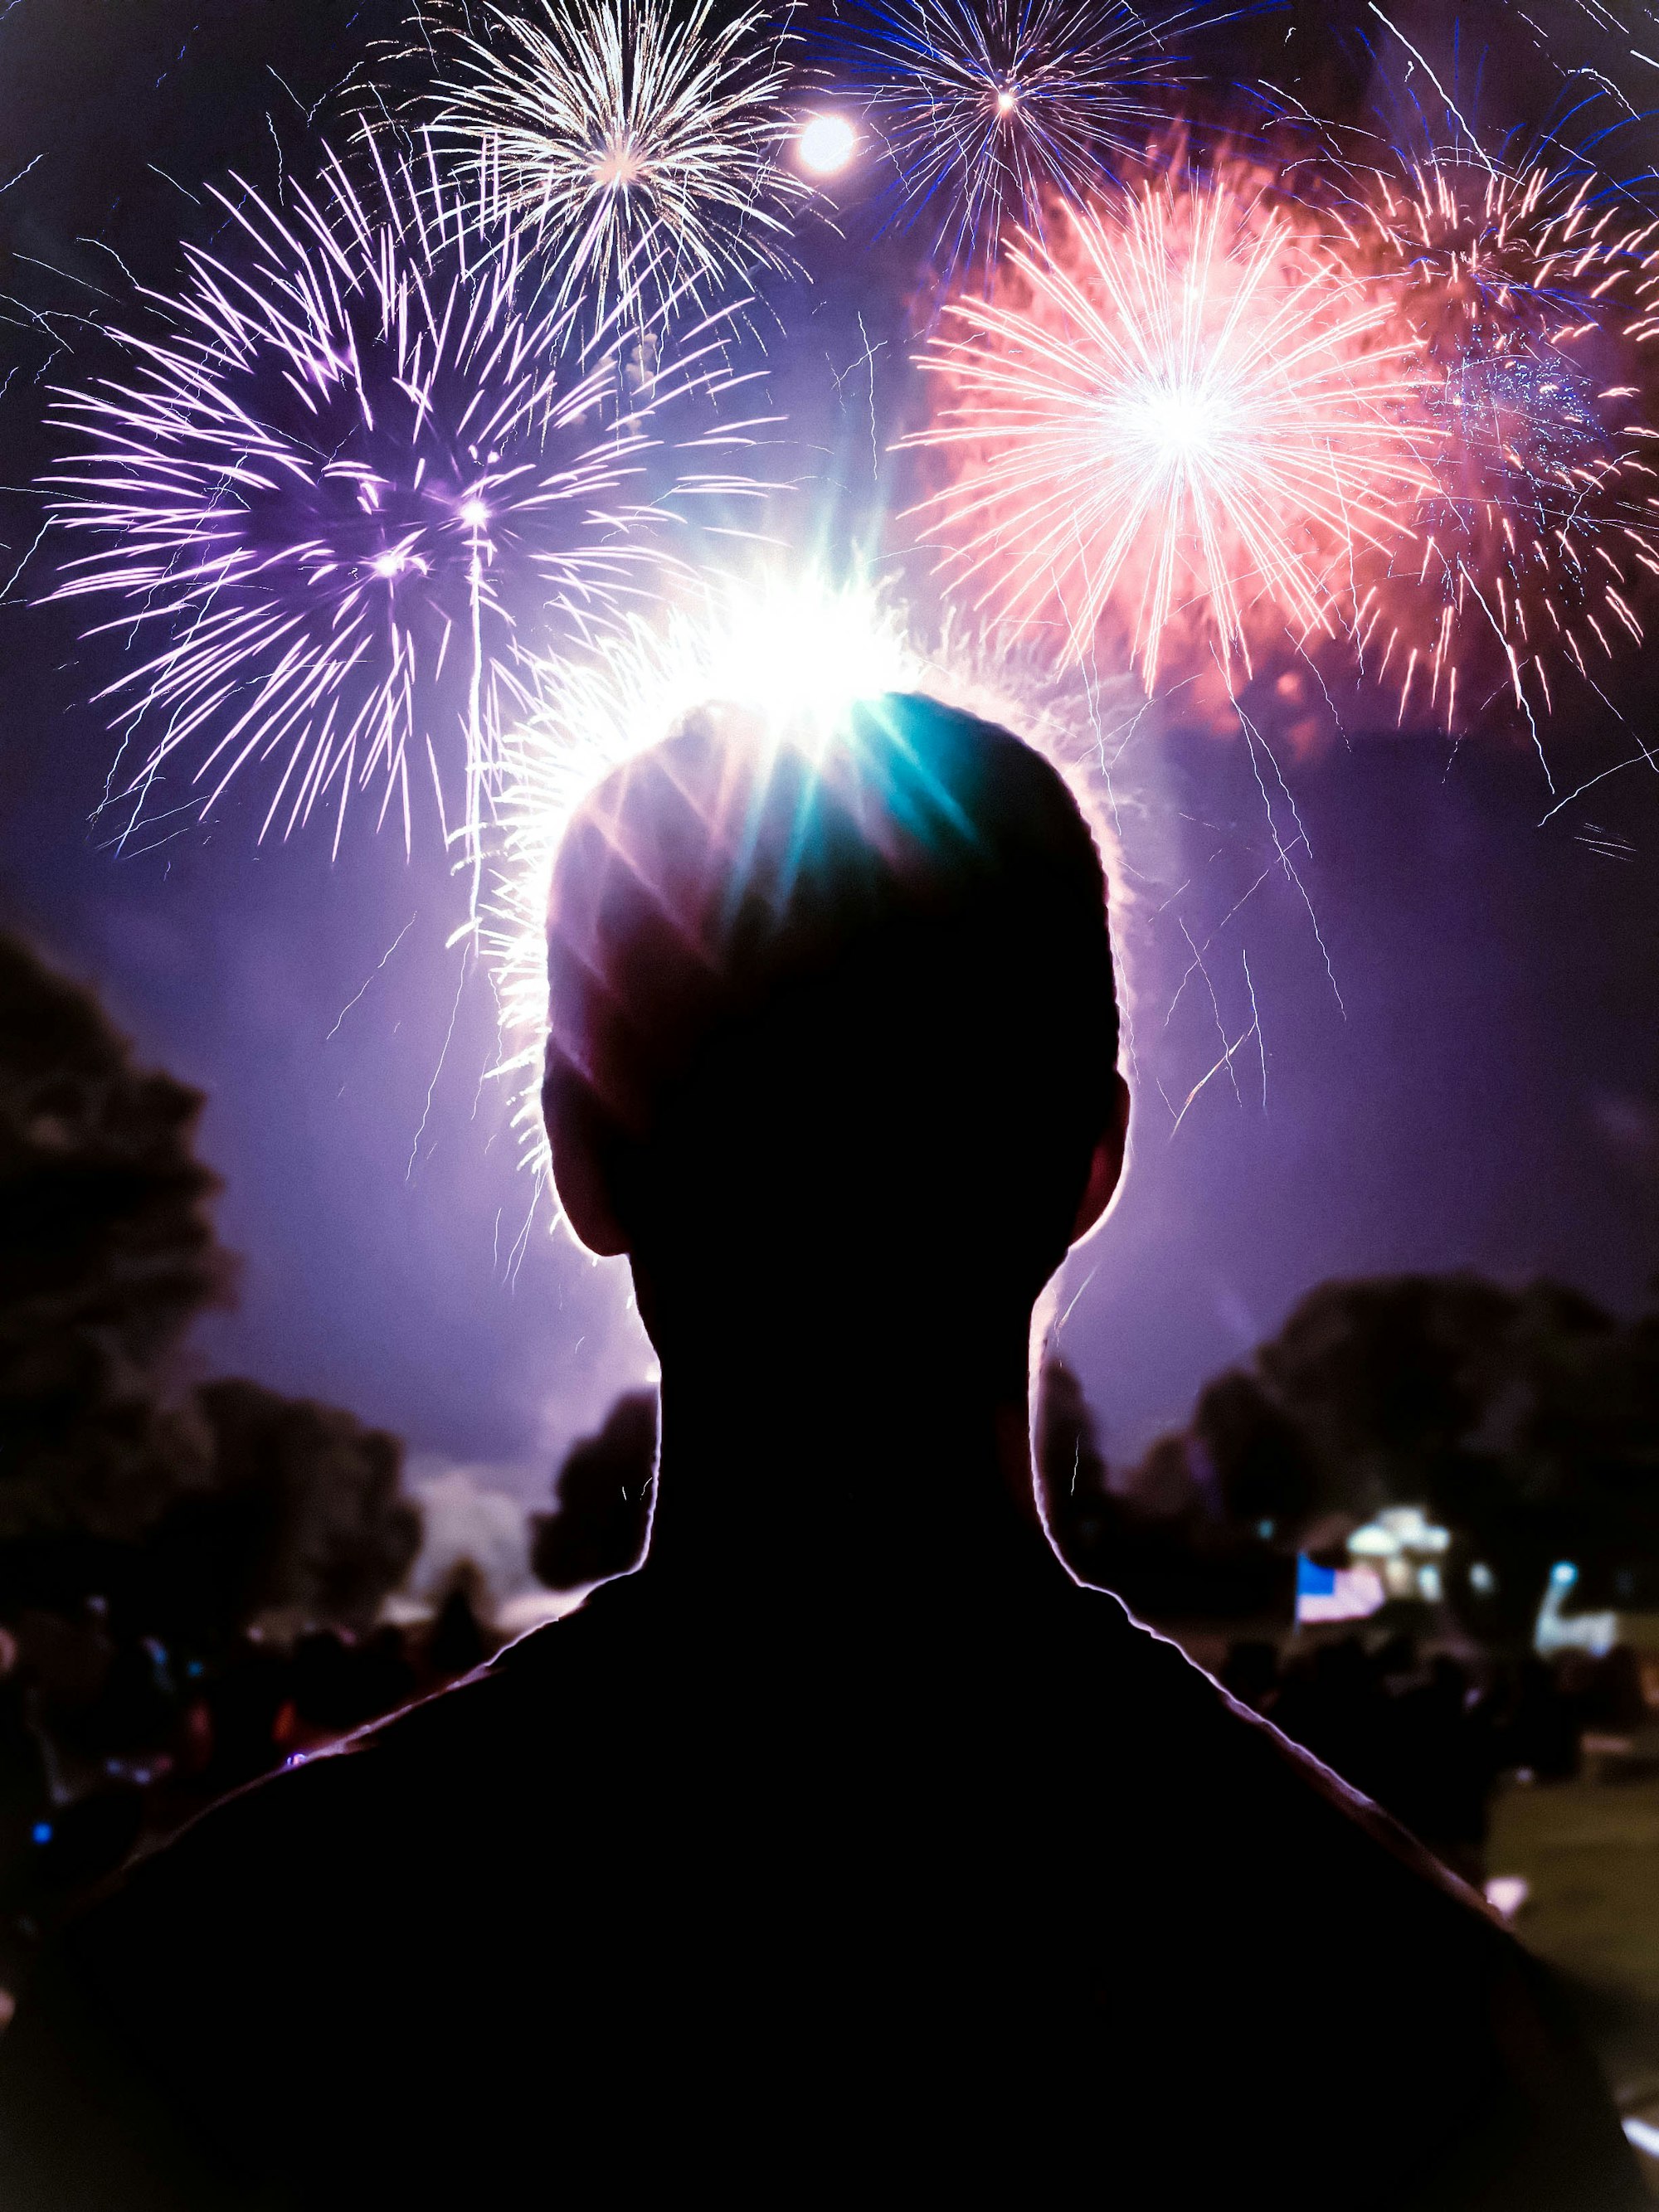 Everyone’s favorite part of a firework’s show is the finale - I captured my younger brother enjoying the lights.